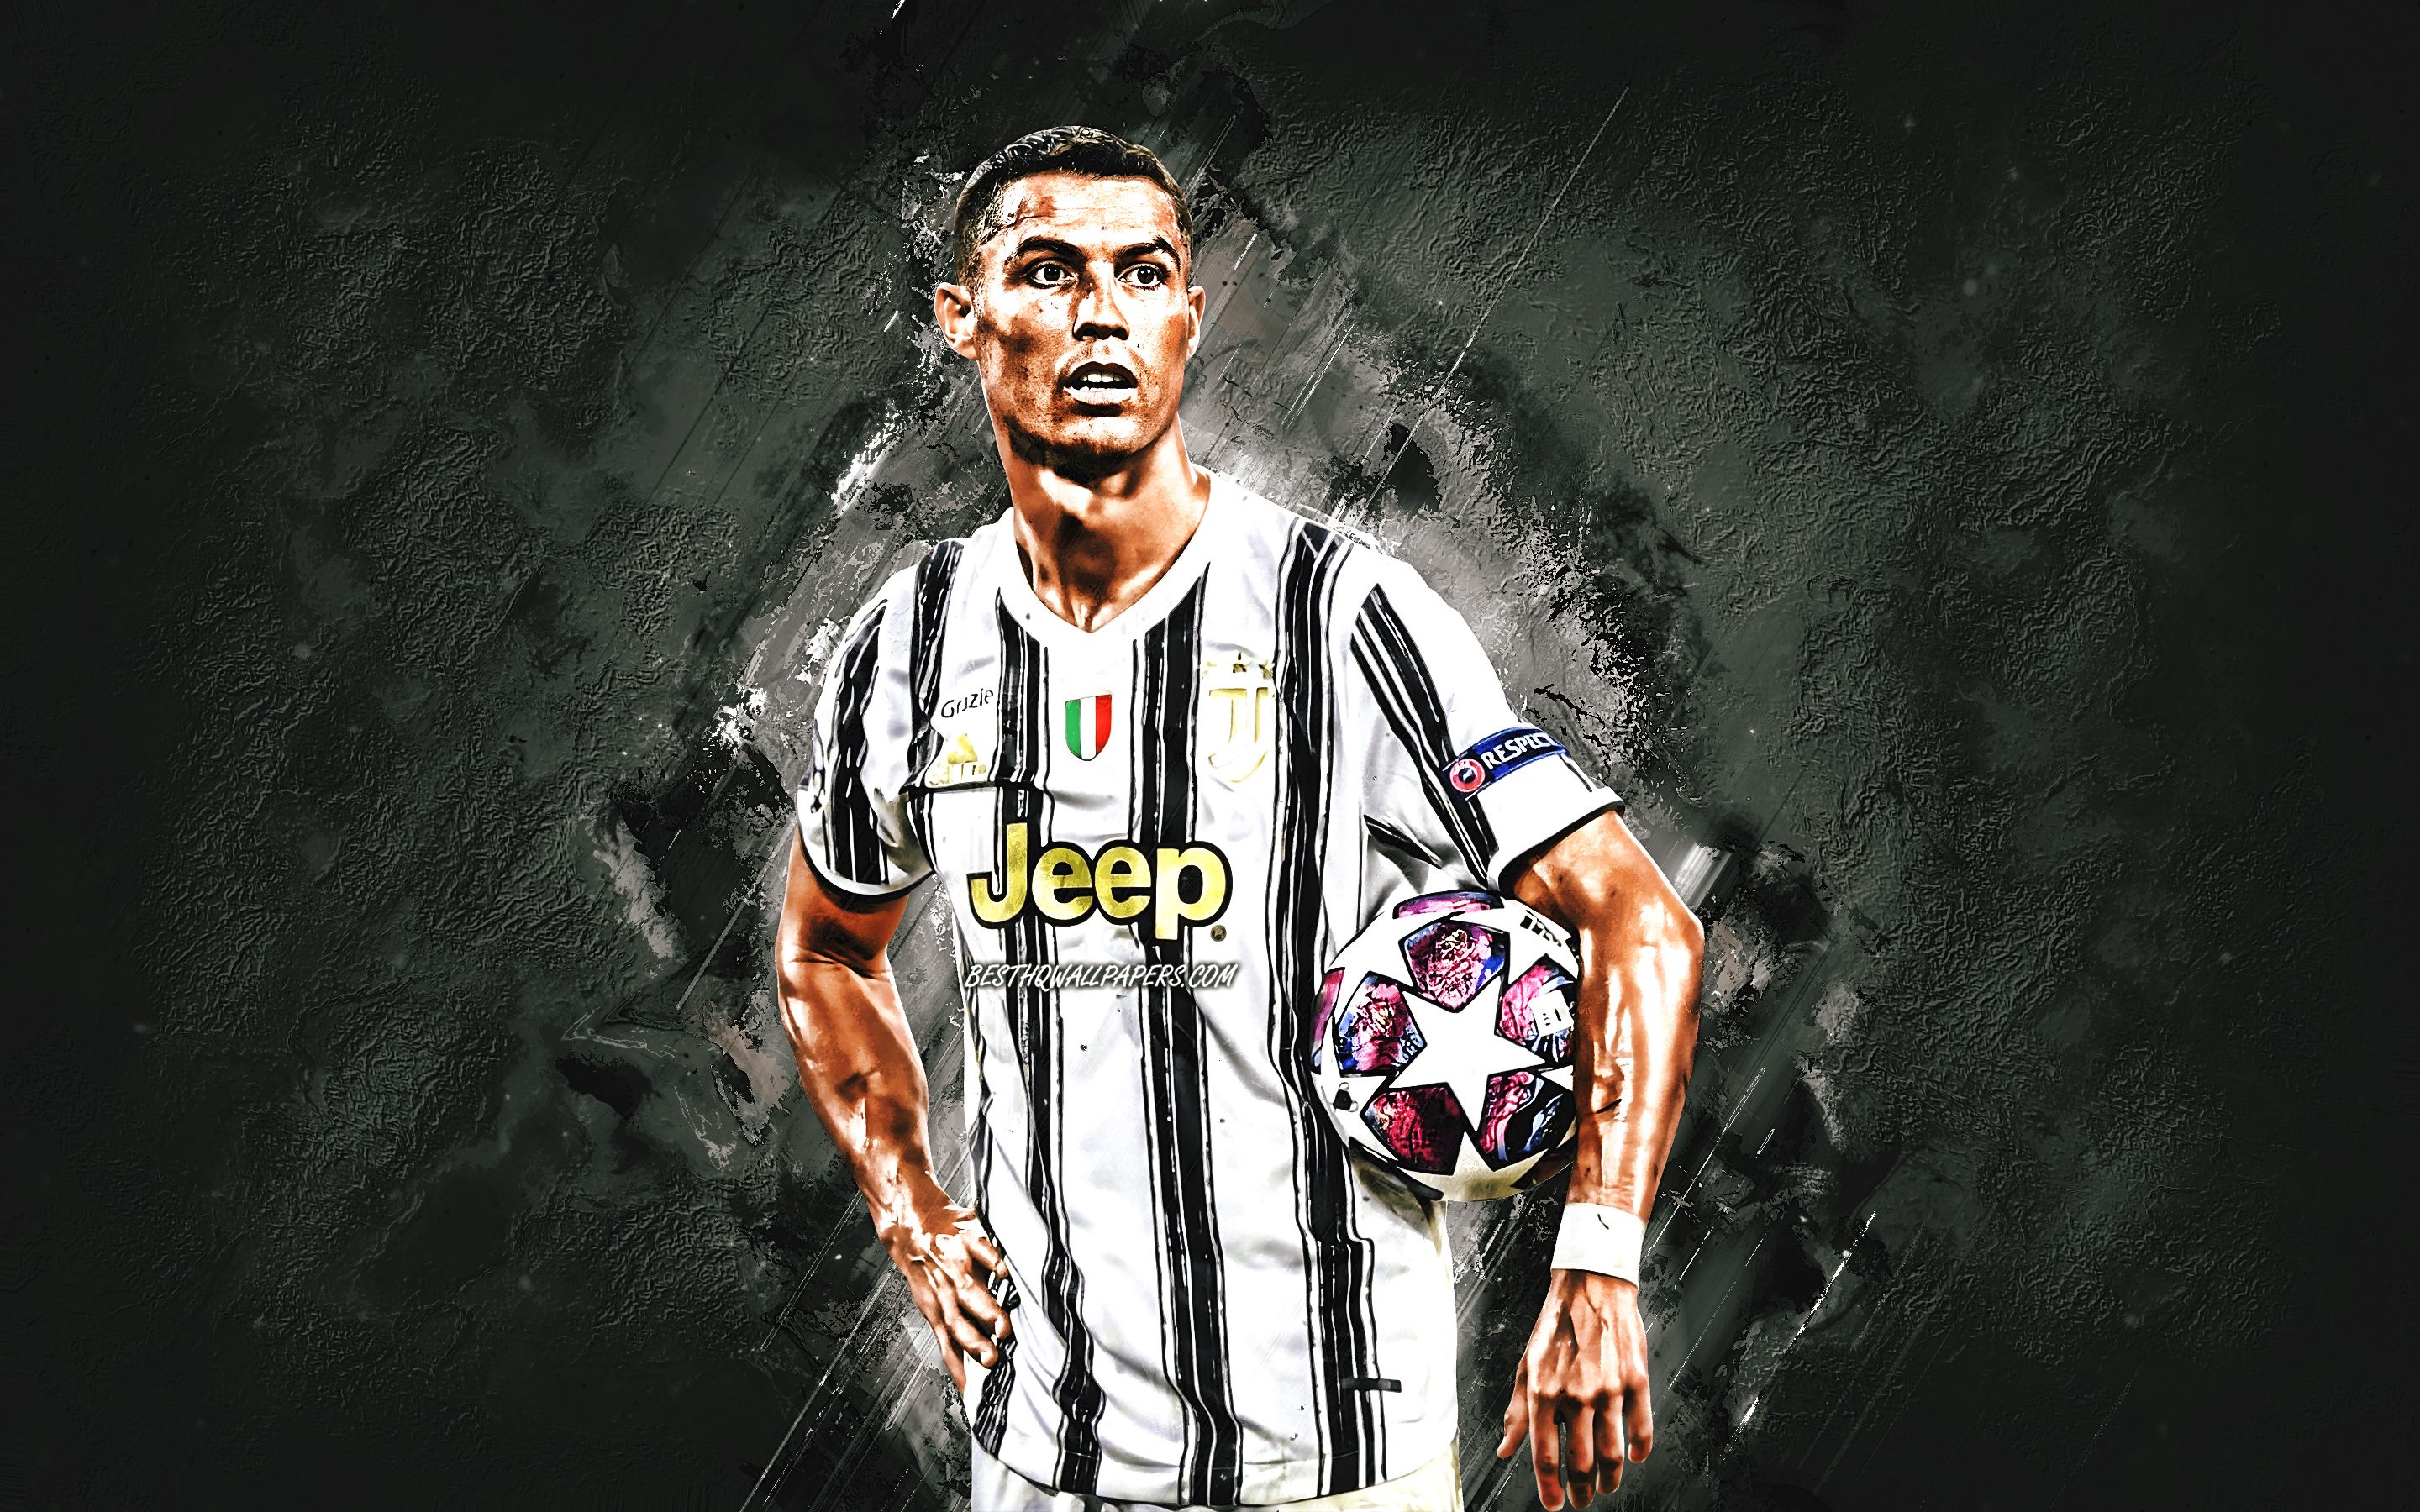 Download wallpaper Cristiano Ronaldo, CR Juventus fc, portrait, juventus 2021 uniforms, champions league, football, world football star for desktop with resolution 2880x1800. High Quality HD picture wallpaper